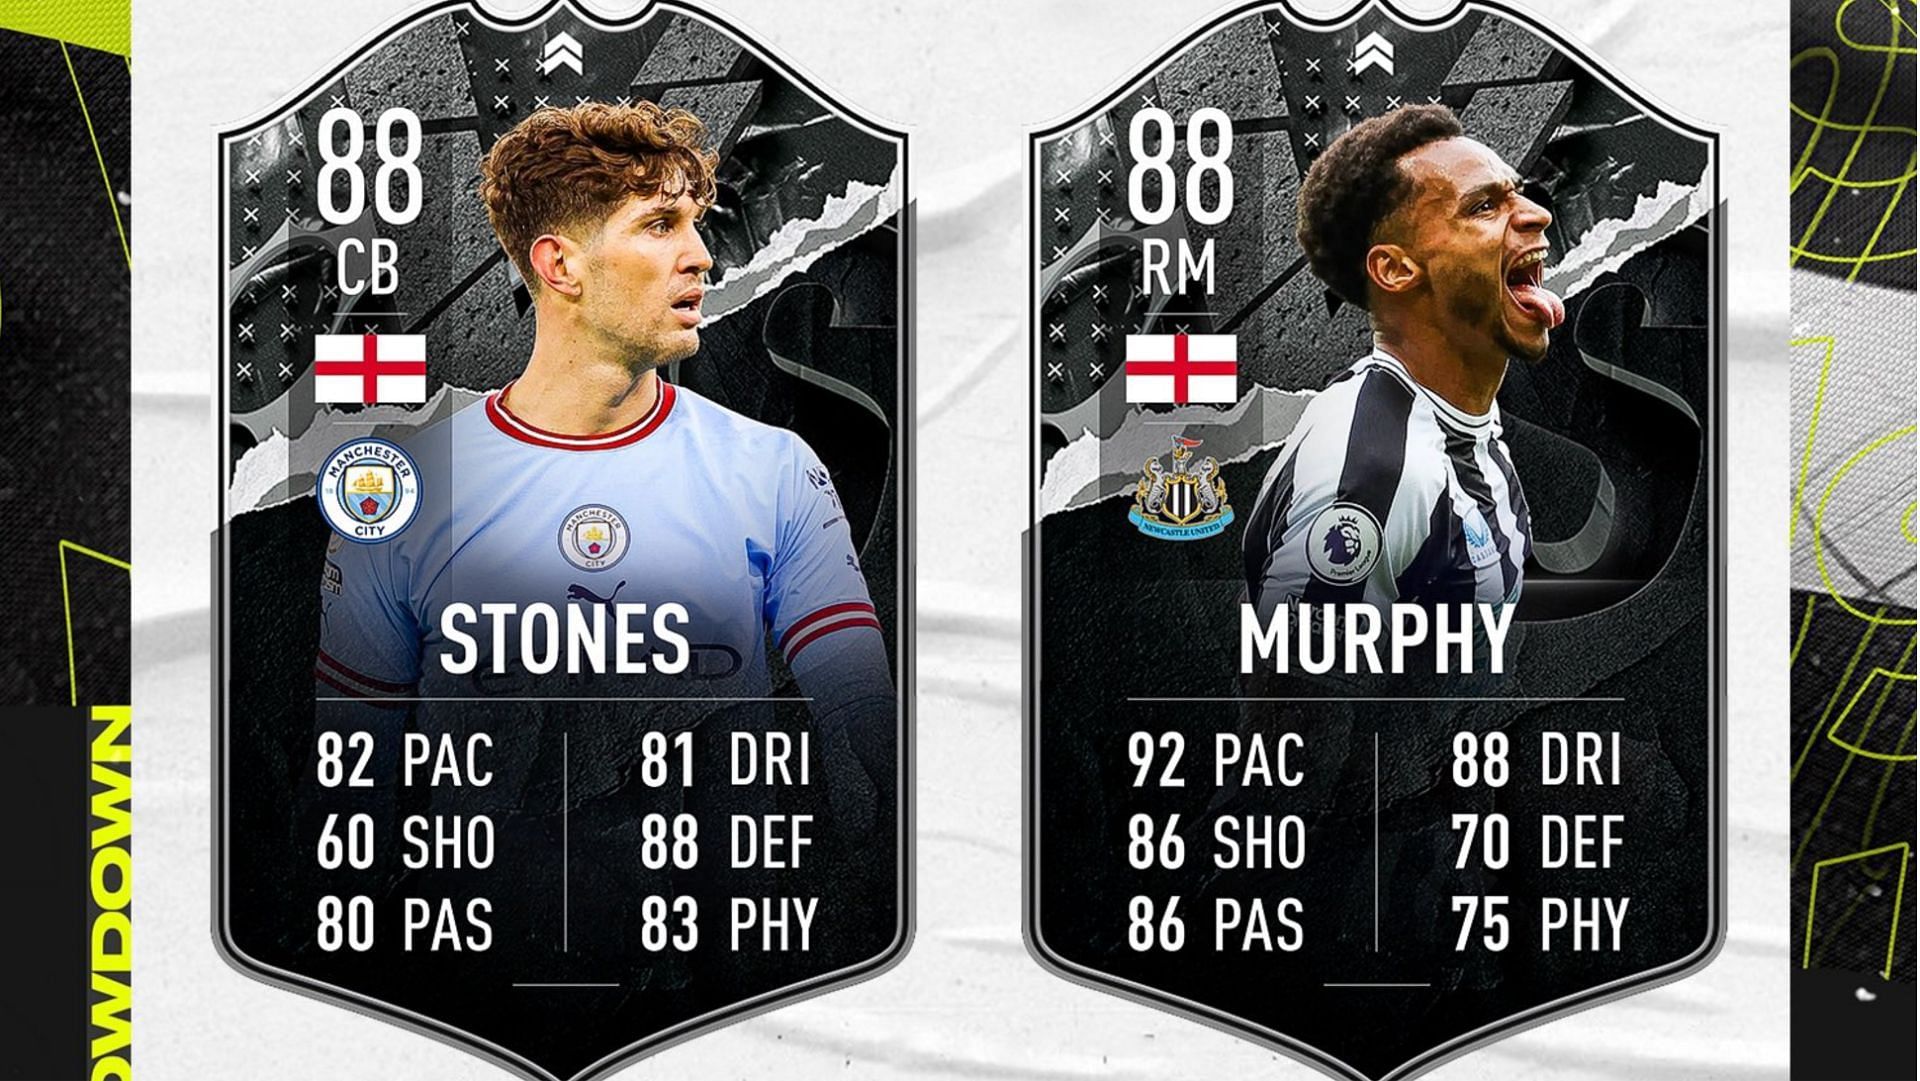 The John Stones and Jacob Murphy Showdown SBC could be an interesting choice for many FIFA 23 players (Image via Twitter/FUT Sheriff)